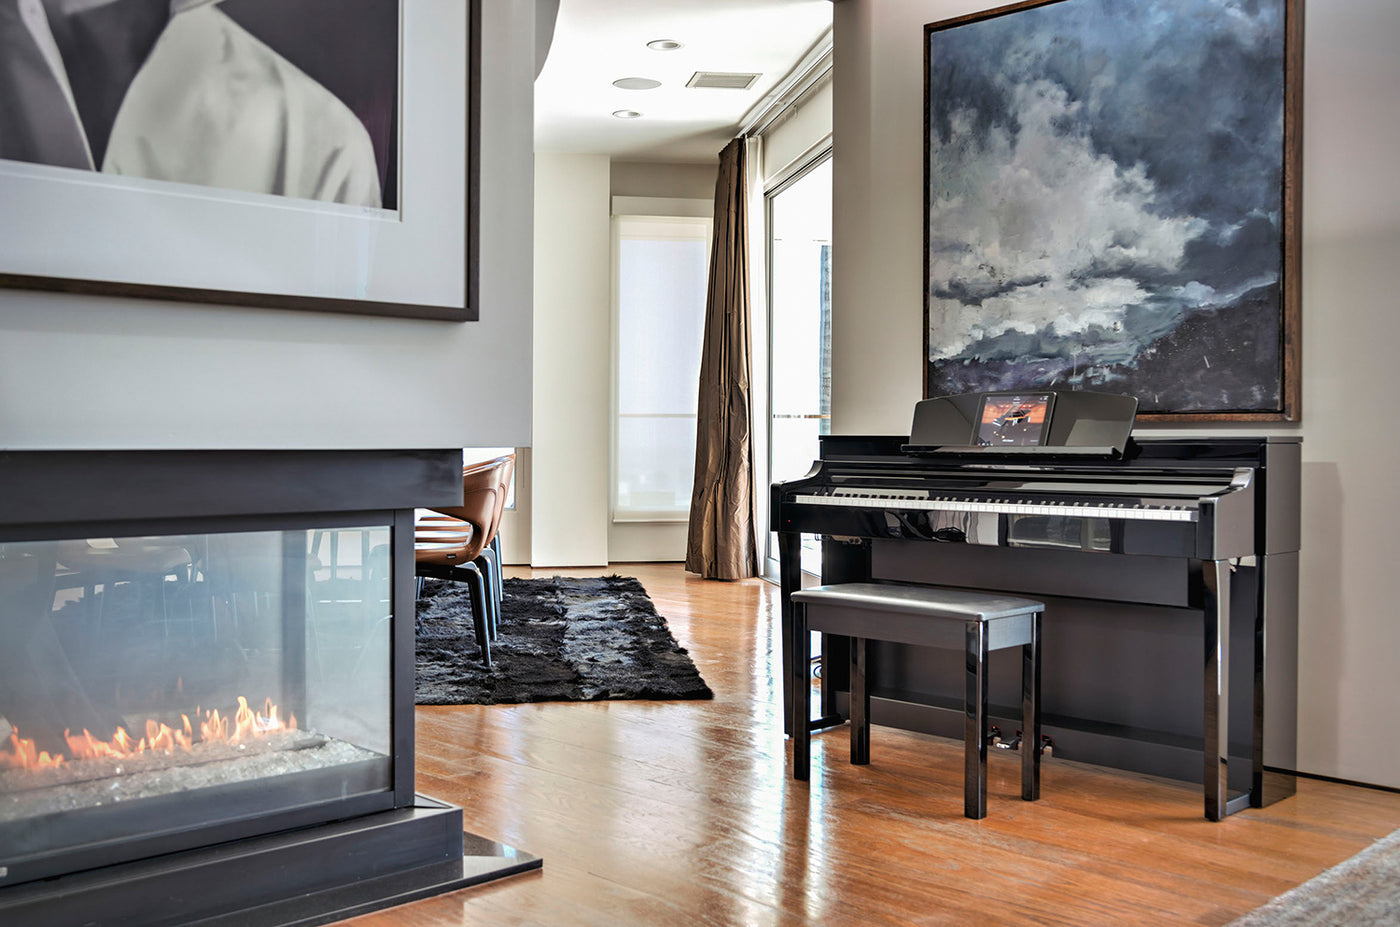 Modern digital piano placed in a well-decorated living room with a fireplace, hardwood floor, and large abstract art piece, illustrating a sophisticated setting for music enthusiasts.